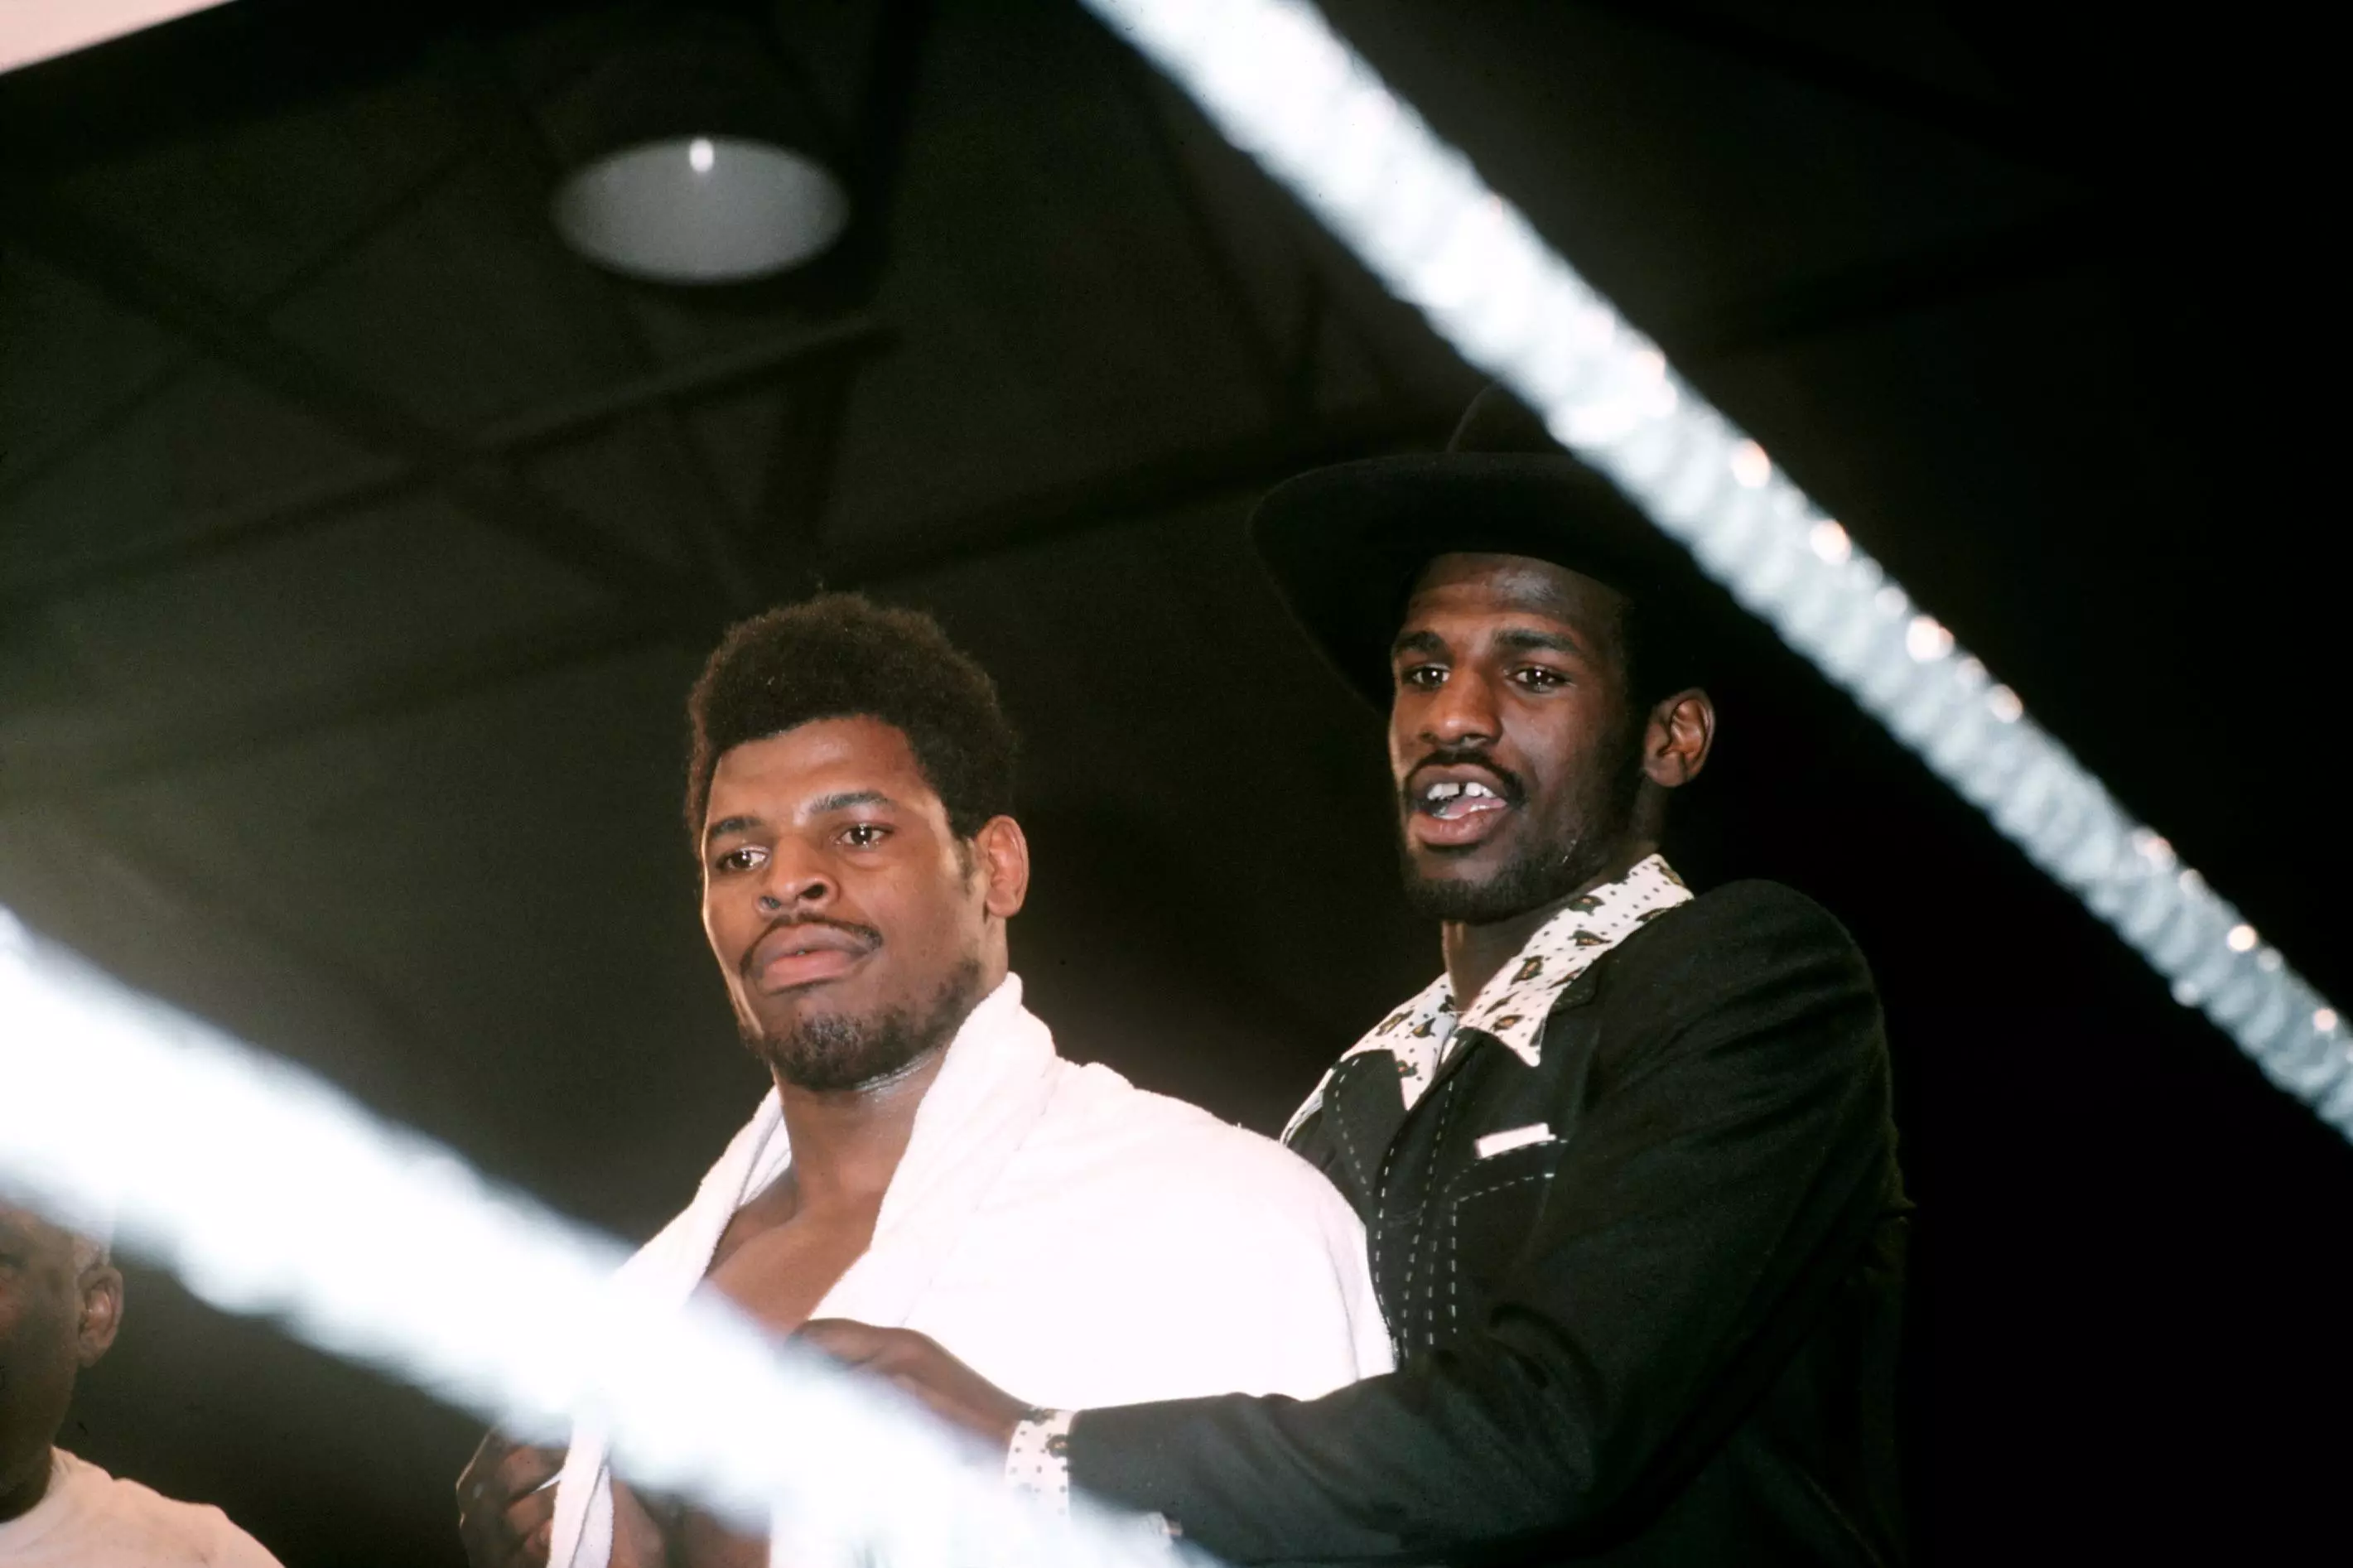 Spinks, left, in 1980. Image: PA Images